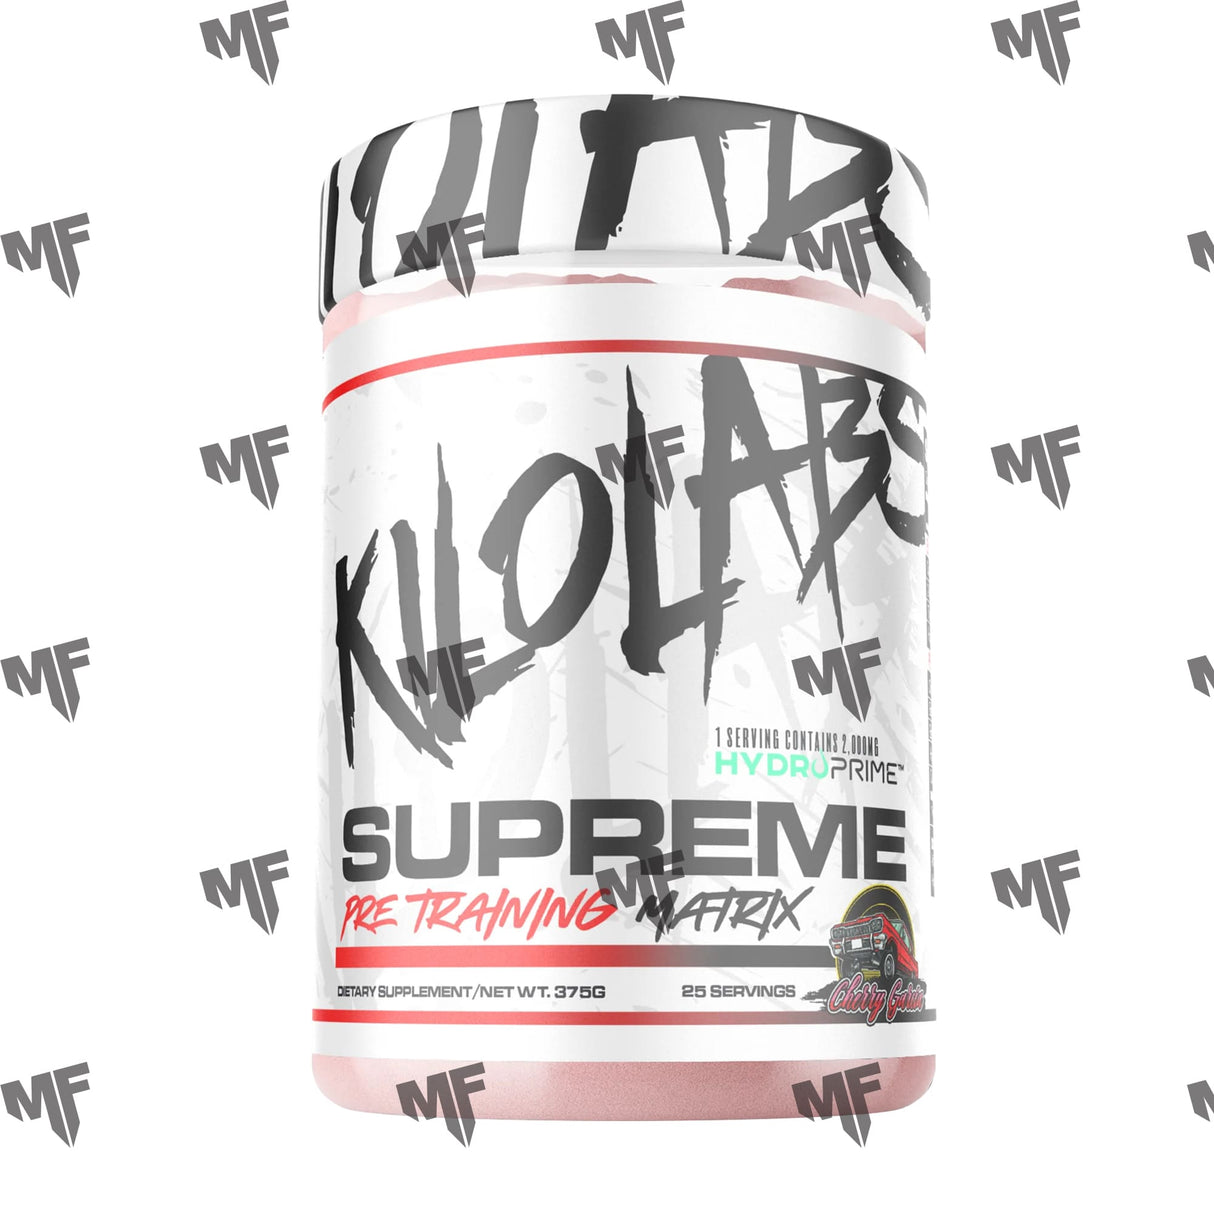 SUPREME PRE-WORKOUT BY KILO LABS - Muscle Factory, LLC